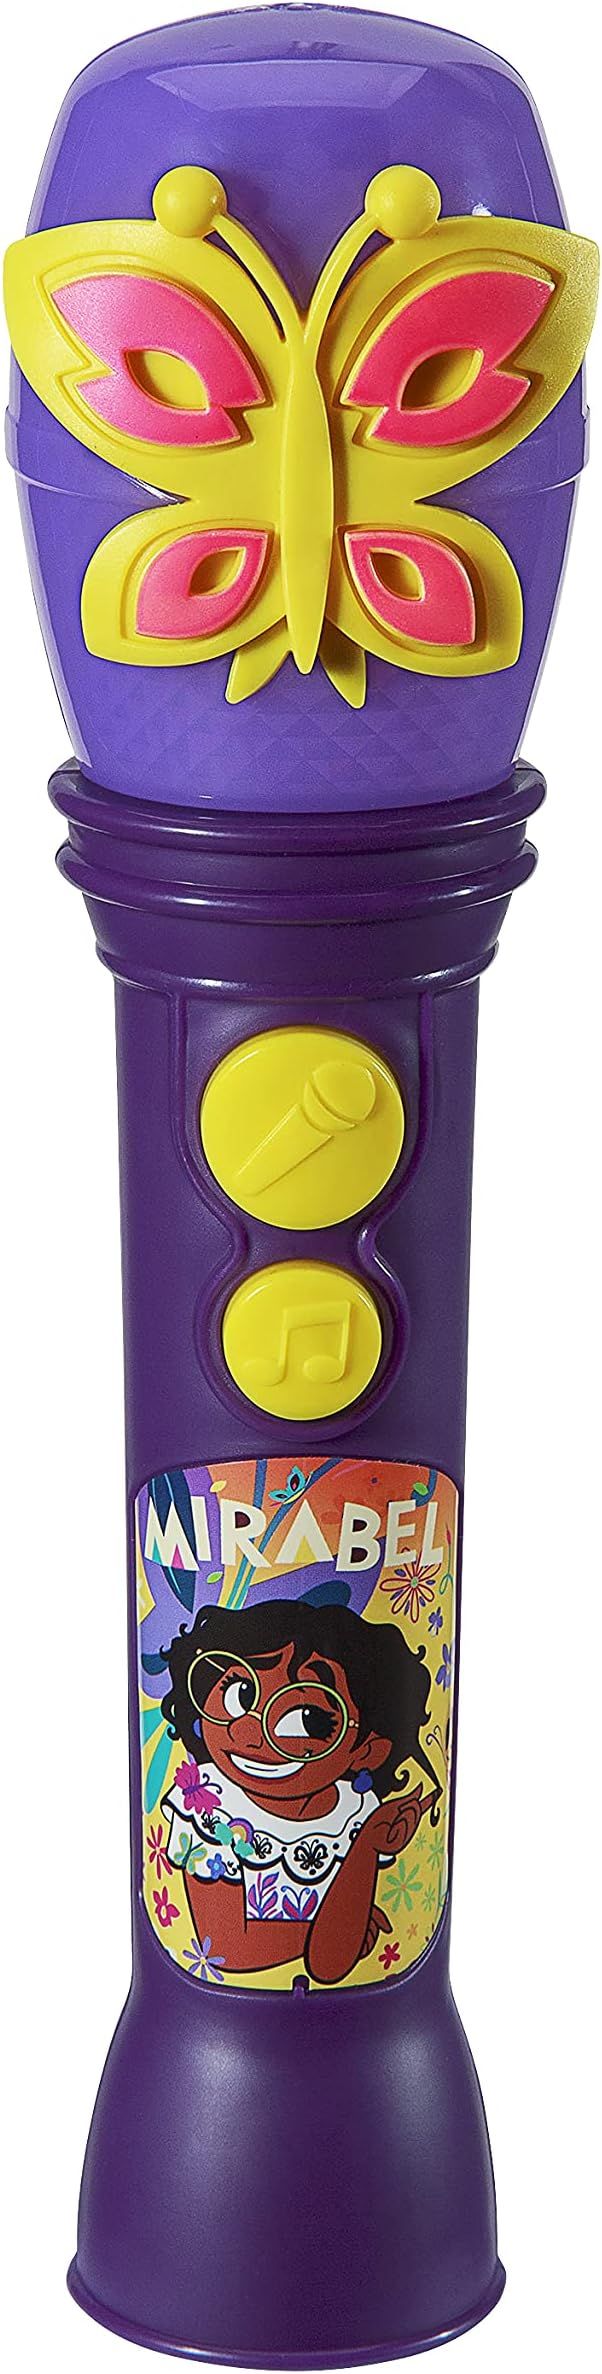 eKids Disney Encanto Toy Microphone for Kids, Built-in Music and Flashing Lights for Fans of Disn... | Amazon (US)